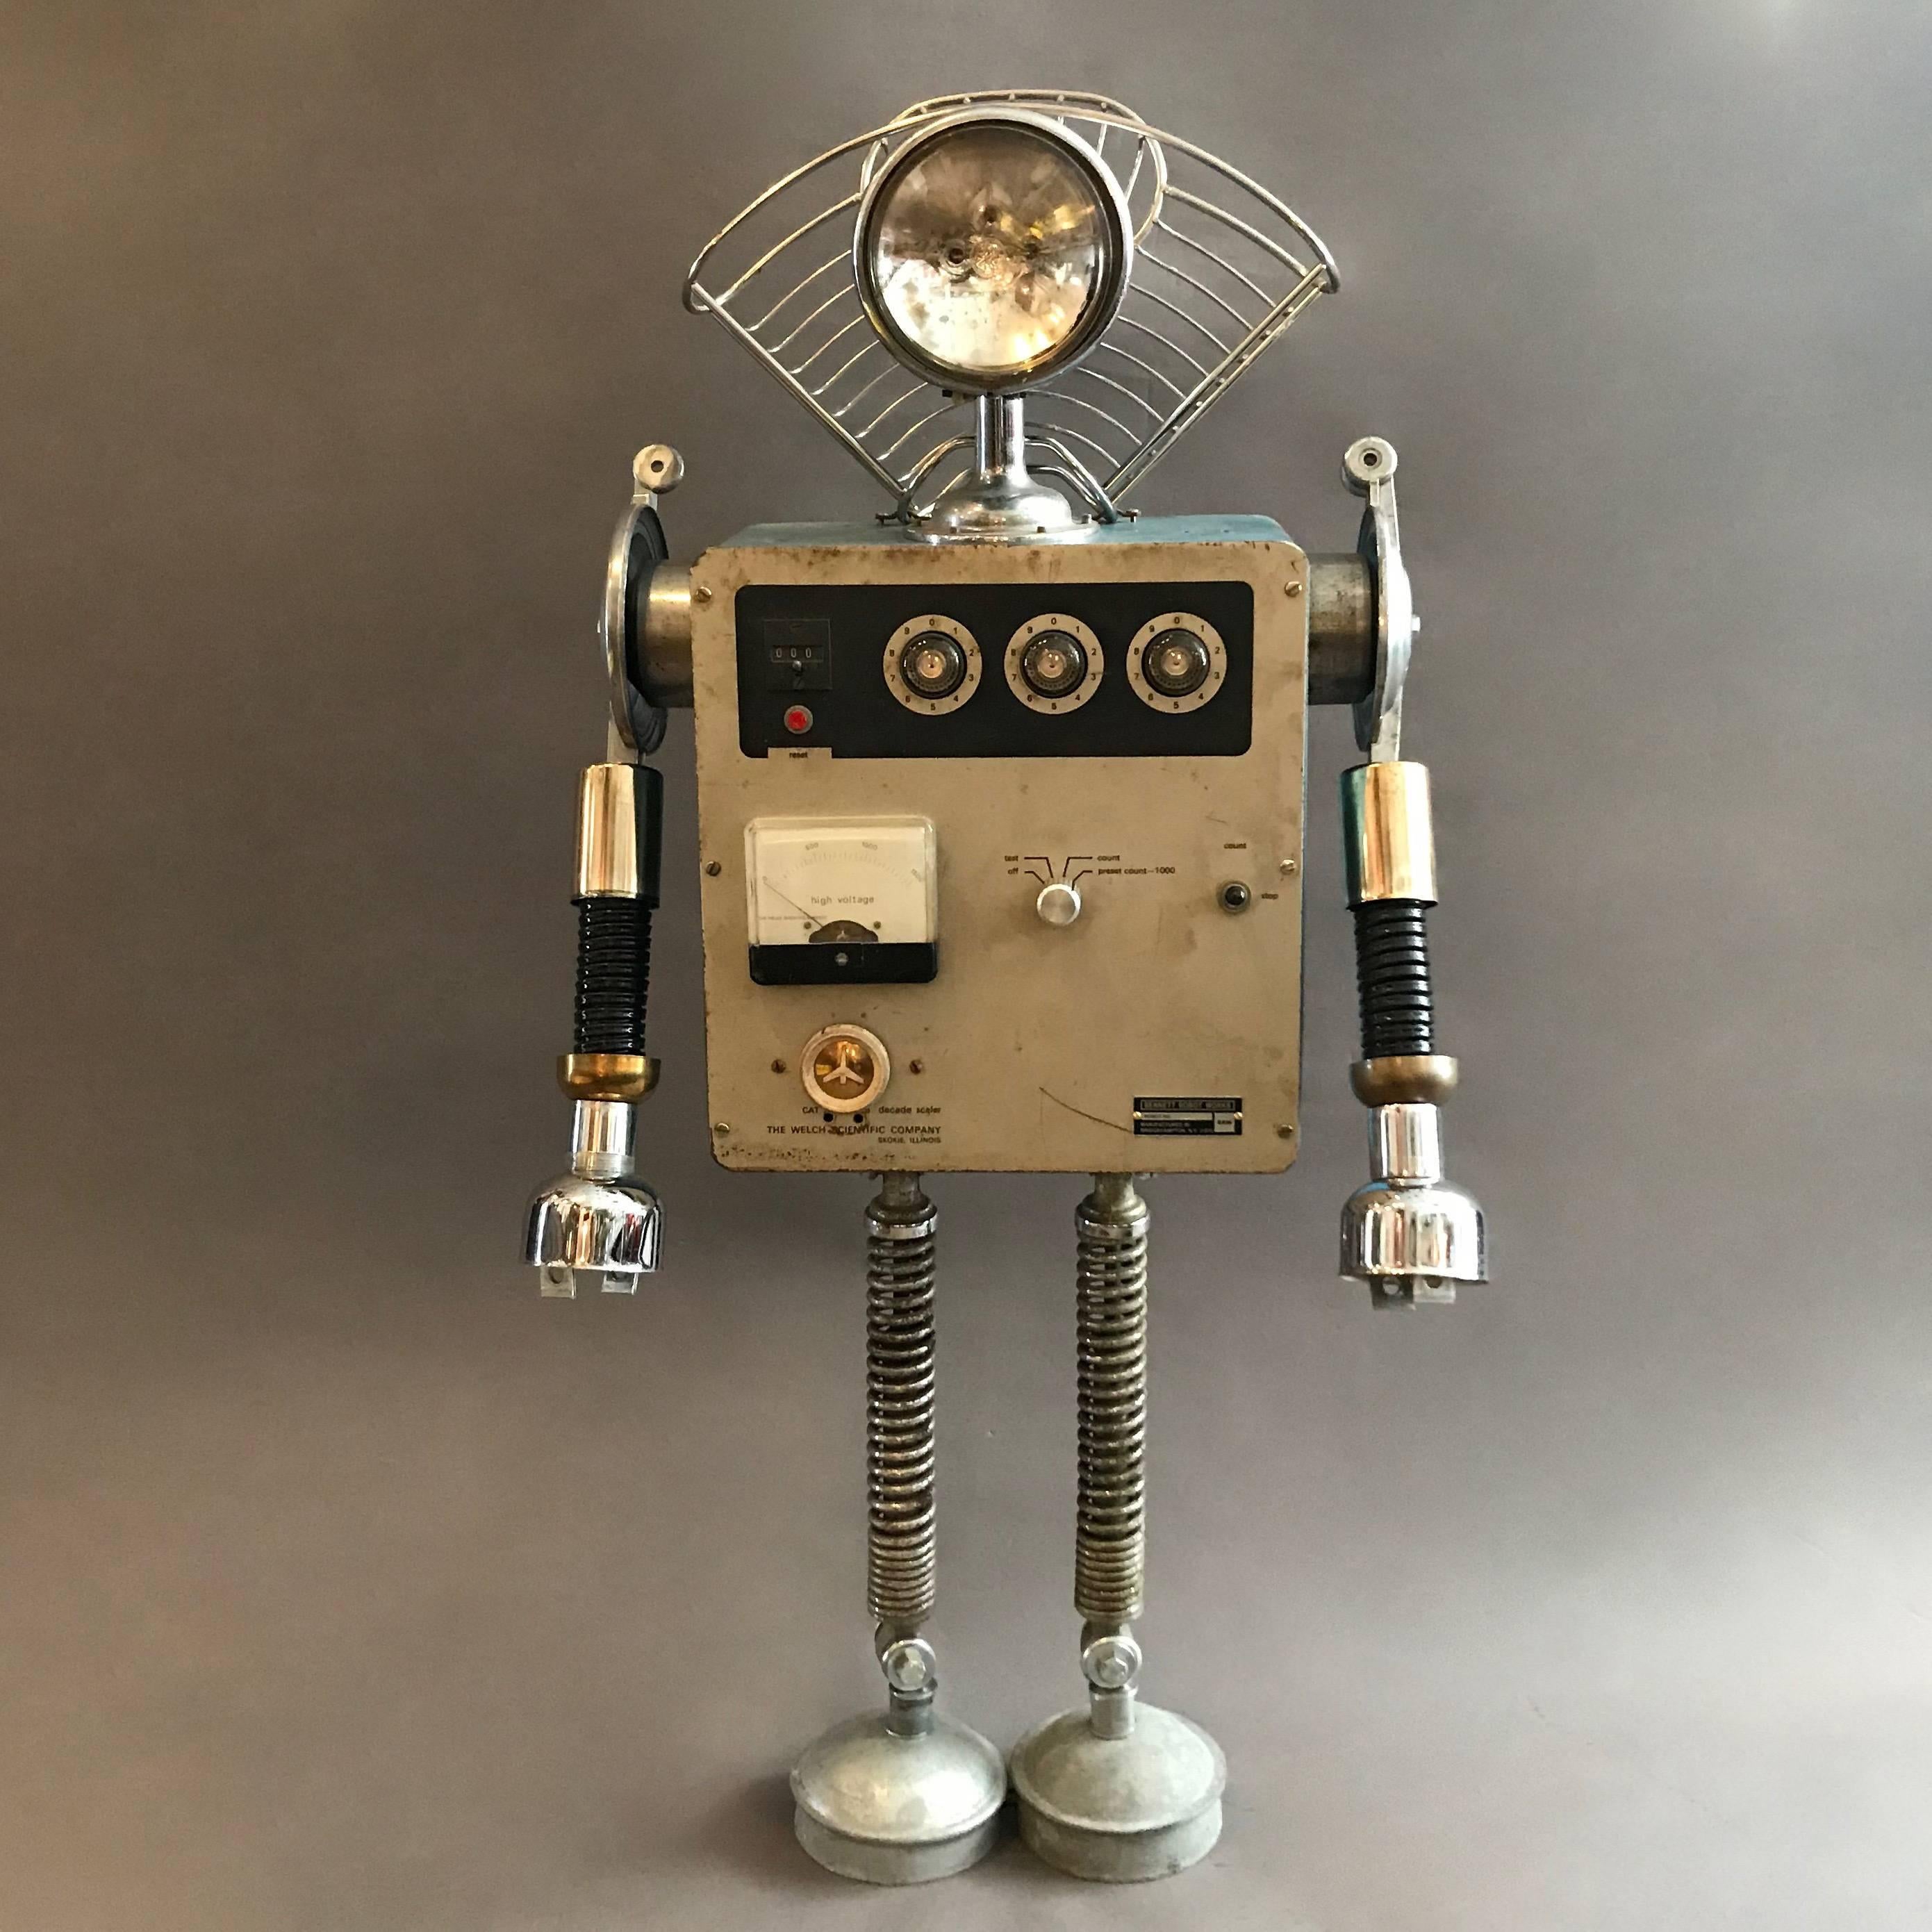 Custom robot sculpture named Welch by Bennett Robot Works, Brooklyn, NY

Bennett Robot Works, robot sculptures created by Gordon Bennett, are composed of found objects used in their unaltered entirety. They are inspired by Norman Bel Geddes and